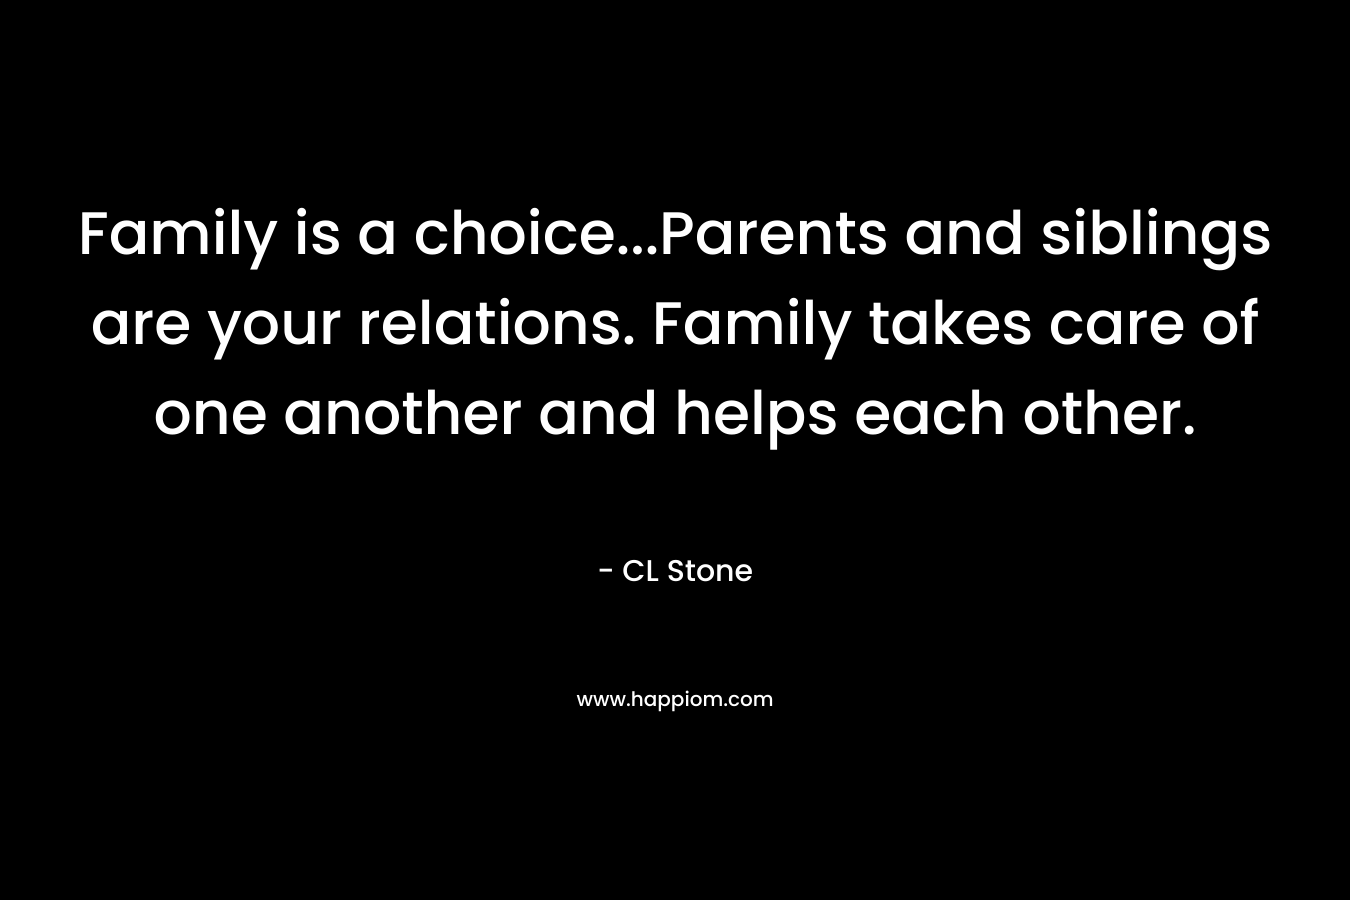 Family is a choice…Parents and siblings are your relations. Family takes care of one another and helps each other. – CL Stone